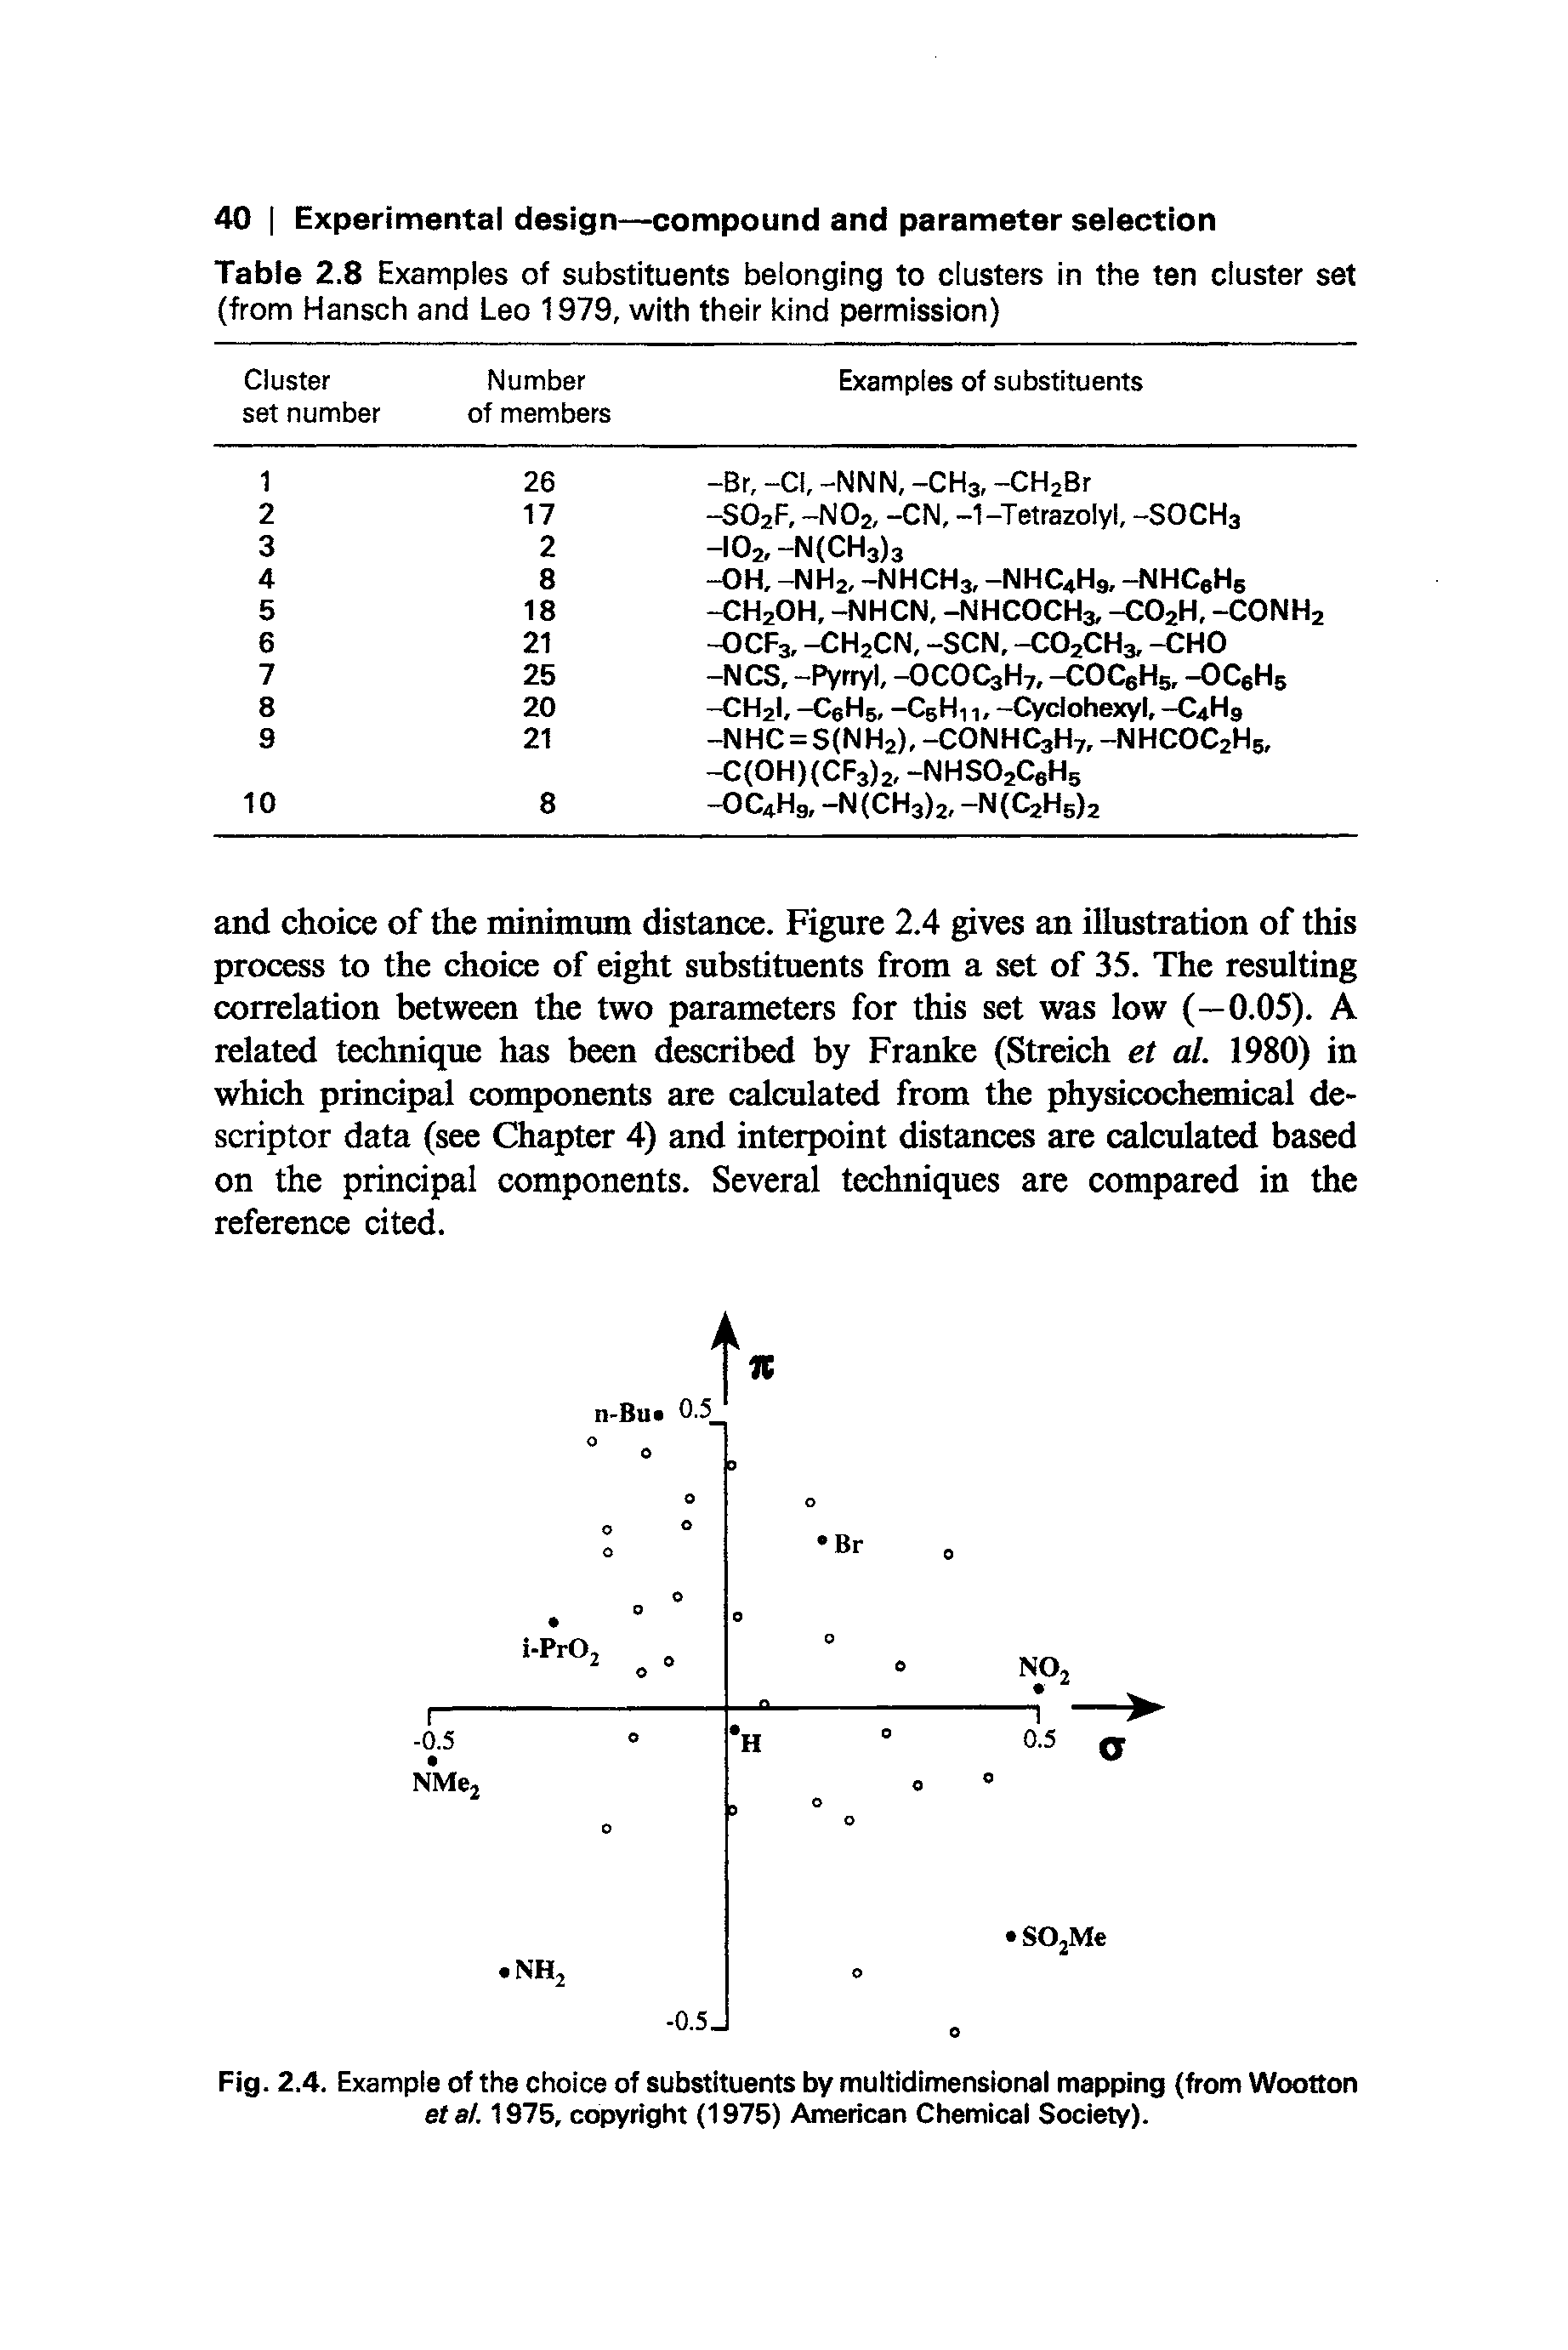 Fig. 2.4. Example of the choice of substituents by multidimensional mapping (from Wootton et at. 1975, copyright (1975) American Chemical Society).